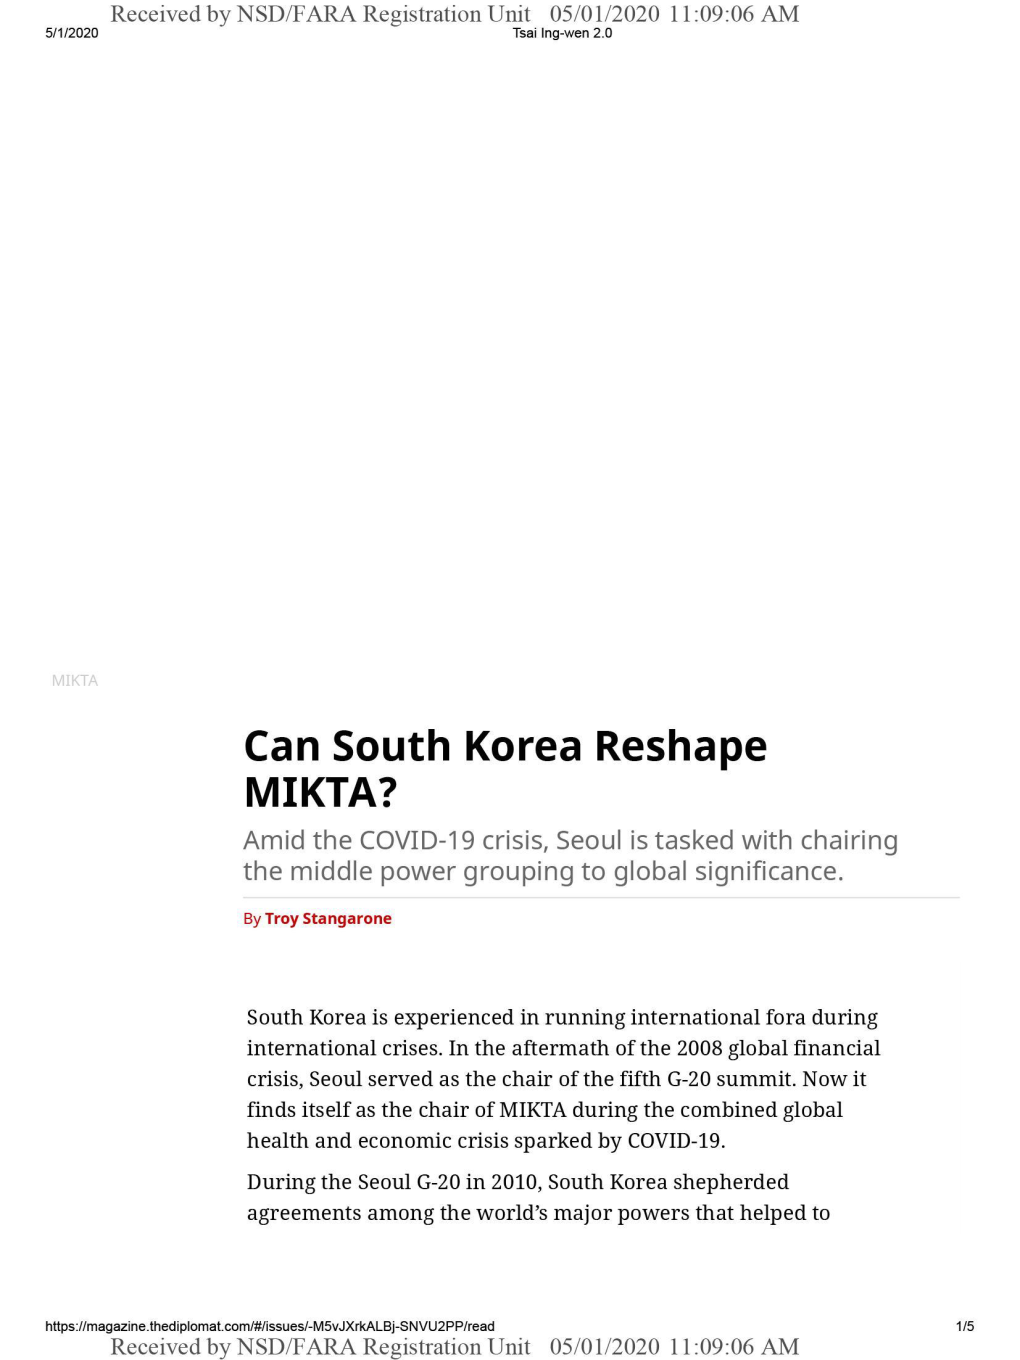 Can South Korea Reshape MIKTA? Amid the COVID-19 Crisis, Seoul Is Tasked with Chairing the Middle Power Grouping to Global Significance